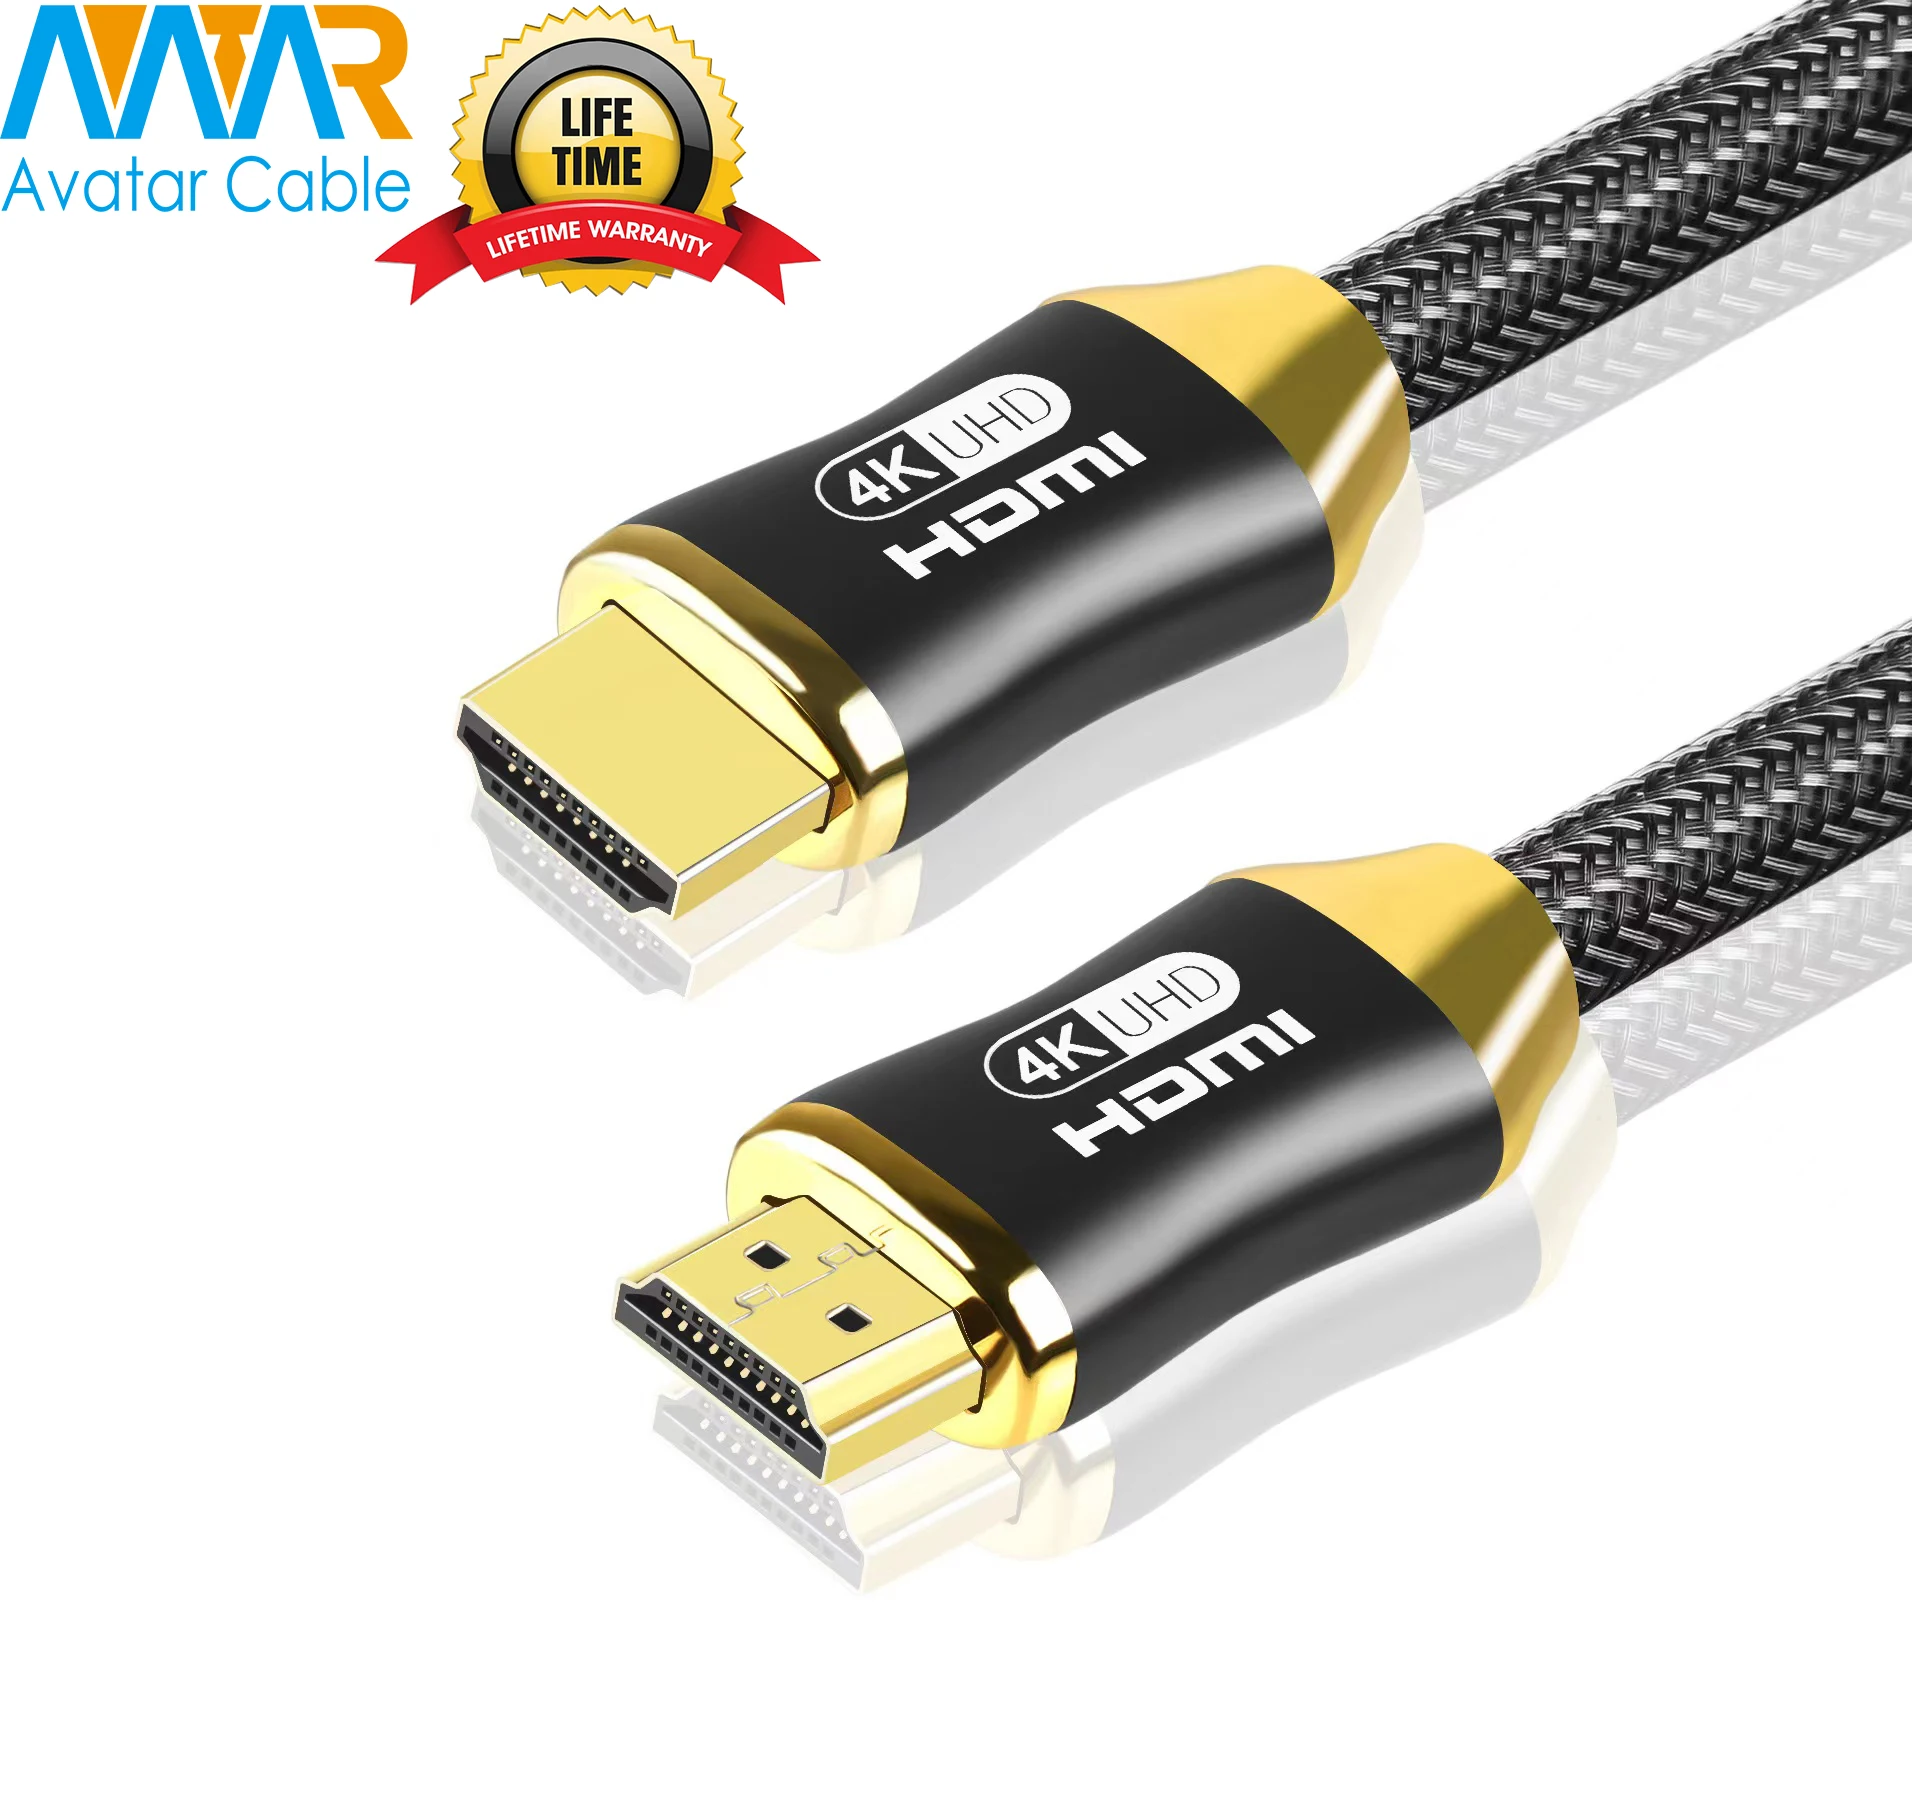 Faktisk dyd frygt Wholesale High Speed 3D 4K 60Hz Hdtv Cable Gold Plated HDMI Male to Male 1M  2M 3M 5M 10M 15M Ultra Hd 2.1 2.0 HDMI Cable From m.alibaba.com